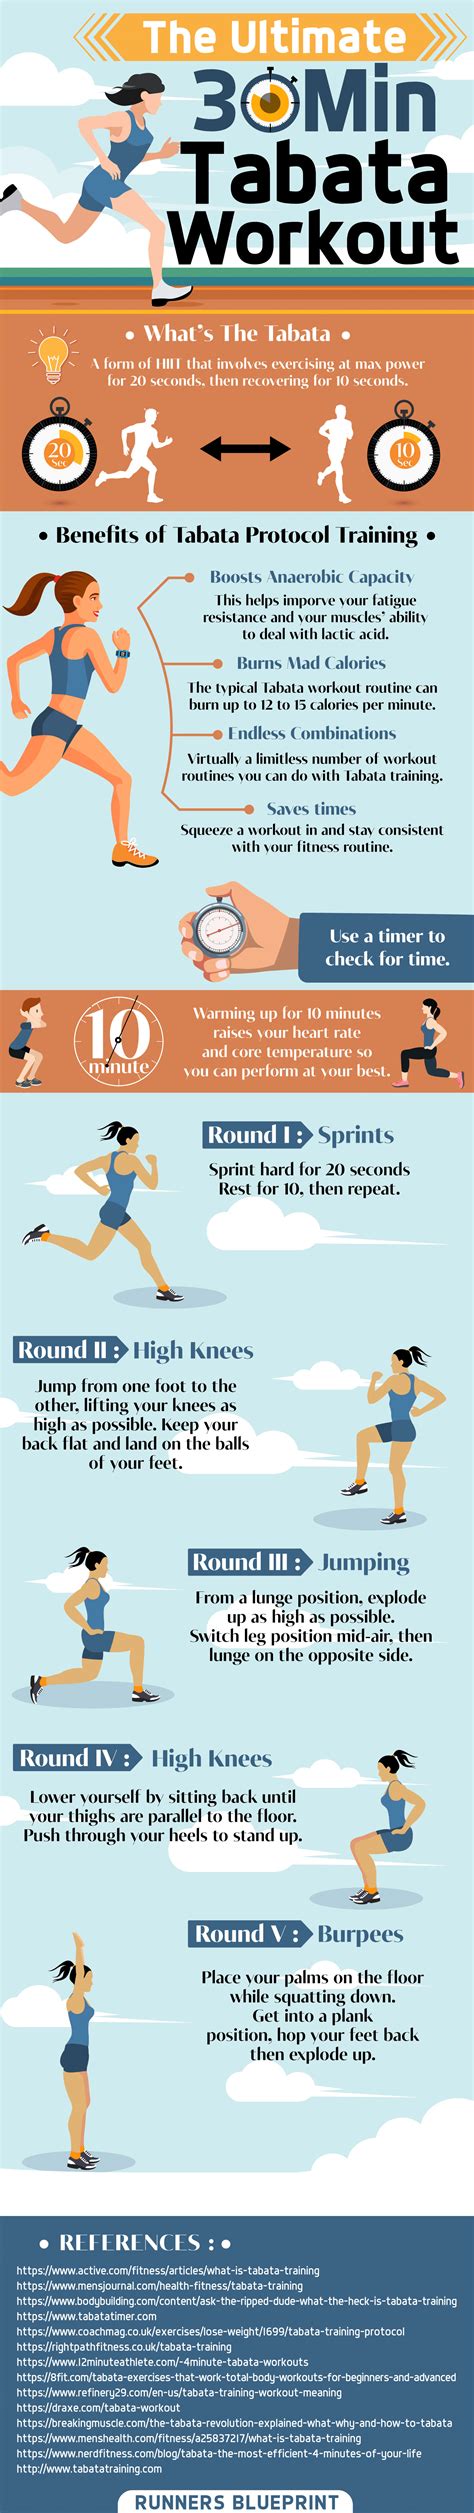 The Ultimate 30 Minute Tabata Workout Infographic — Runners Blueprint